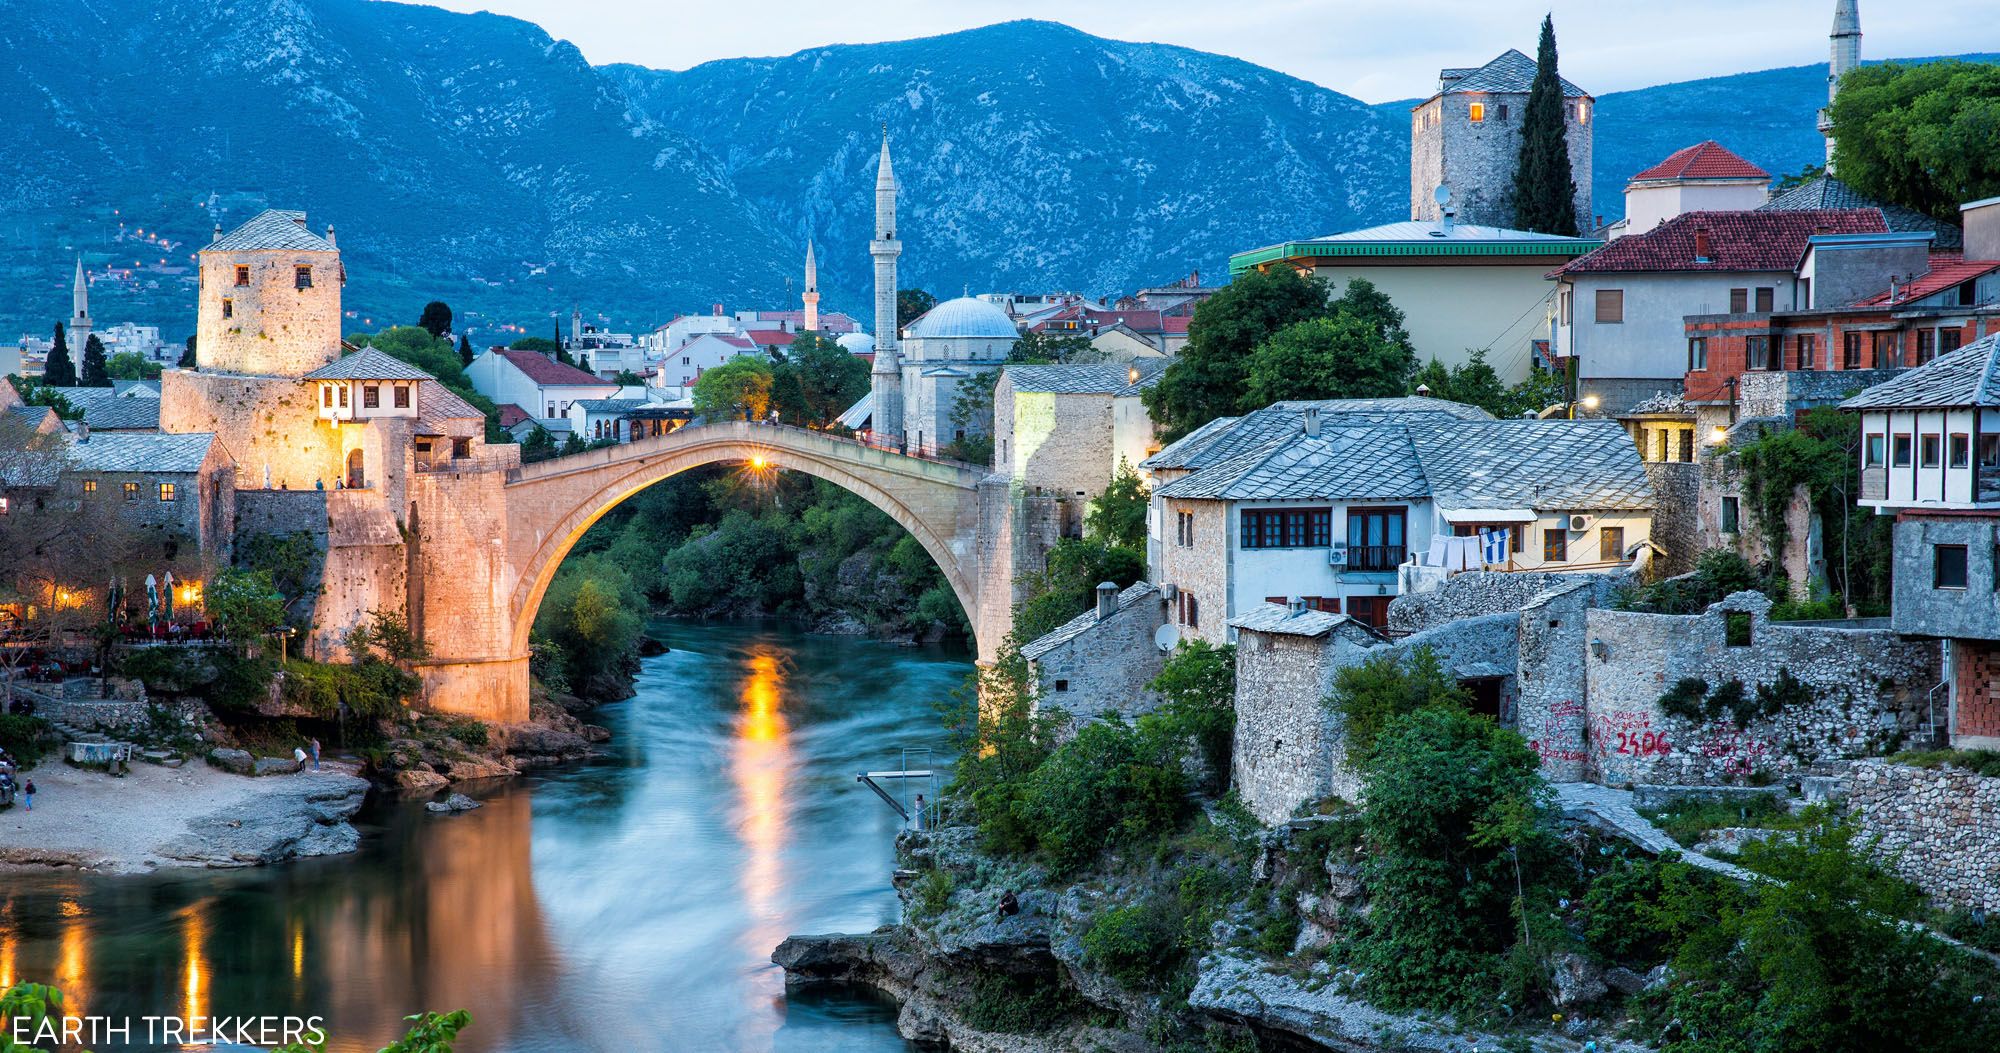 Featured image for “Photographing Stari Most: Where to get the Best Views in Mostar”